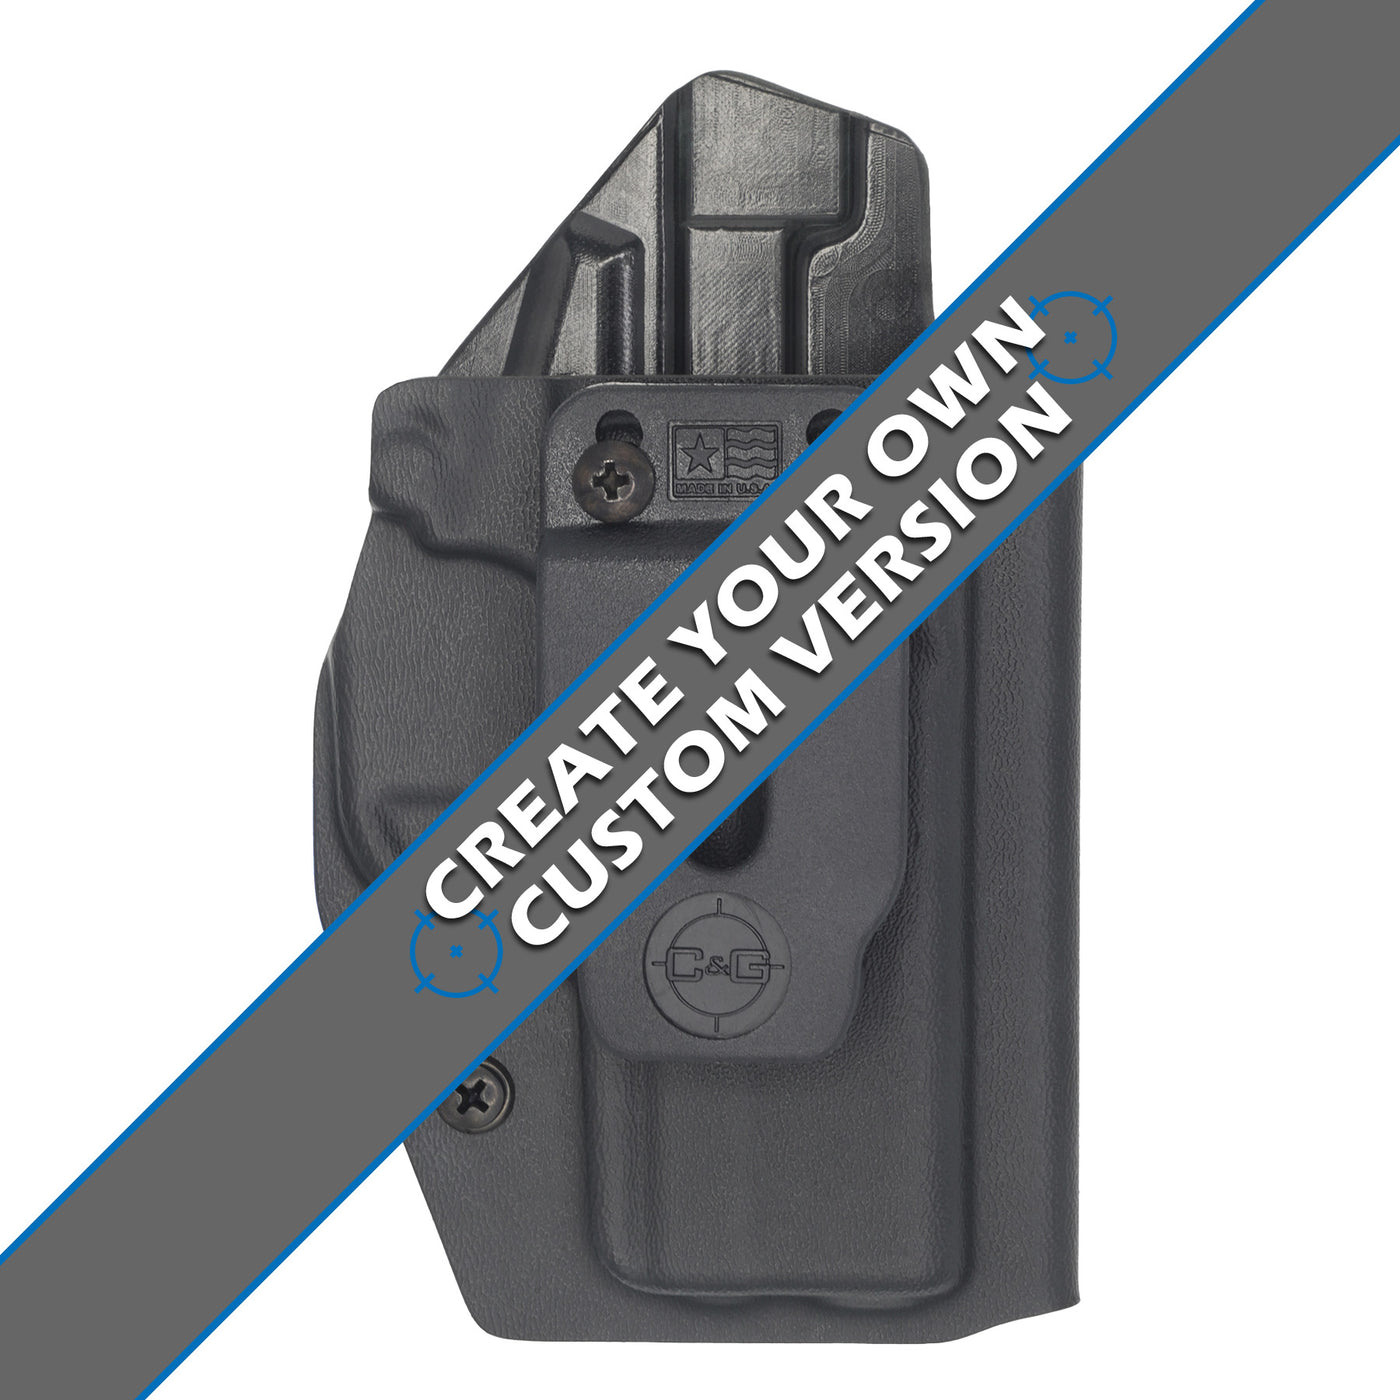 Springfield XD-E IWB Covert Kydex Holster Made by C adn G Holsters. This Image is of the front of the holster showing a create your custom holster banner.